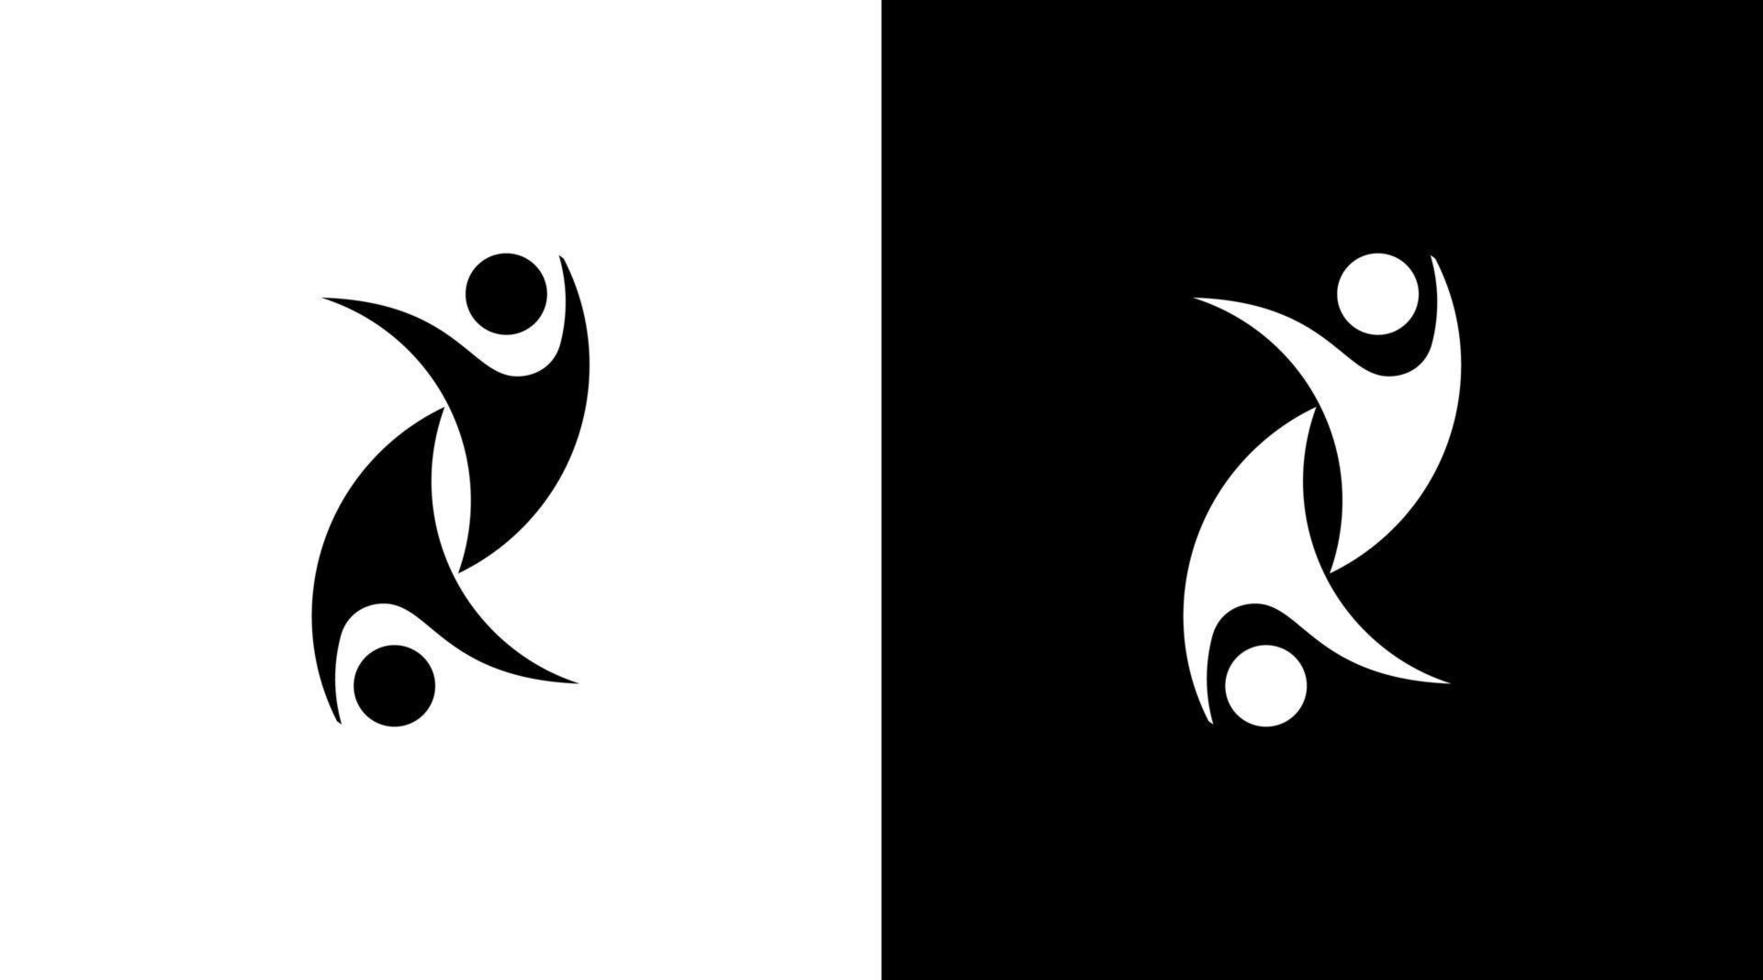 community logo two people unity black and white icon illustration style Designs templates vector